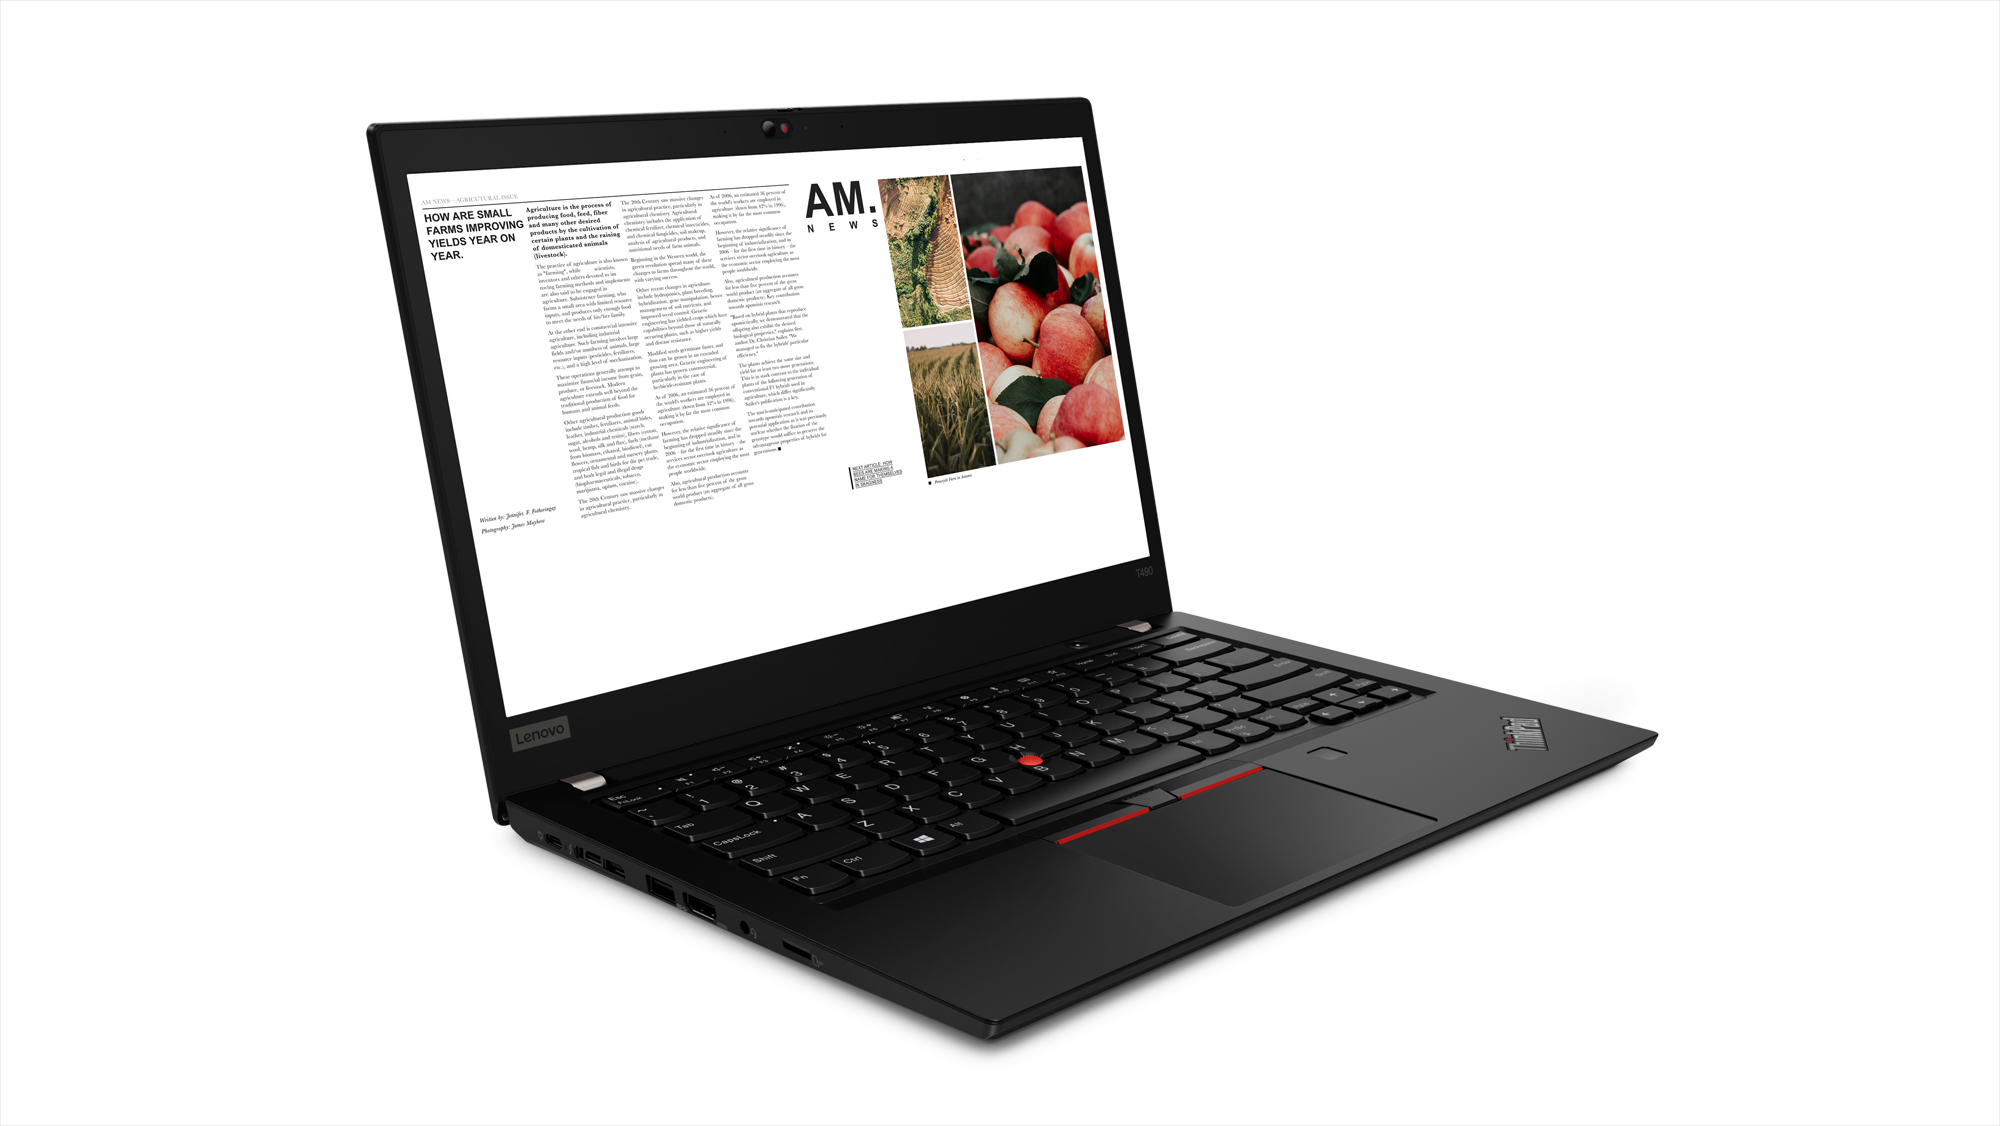 lenovo annouces new thinkpads with 10th gen cometlake thinkpad t490 4